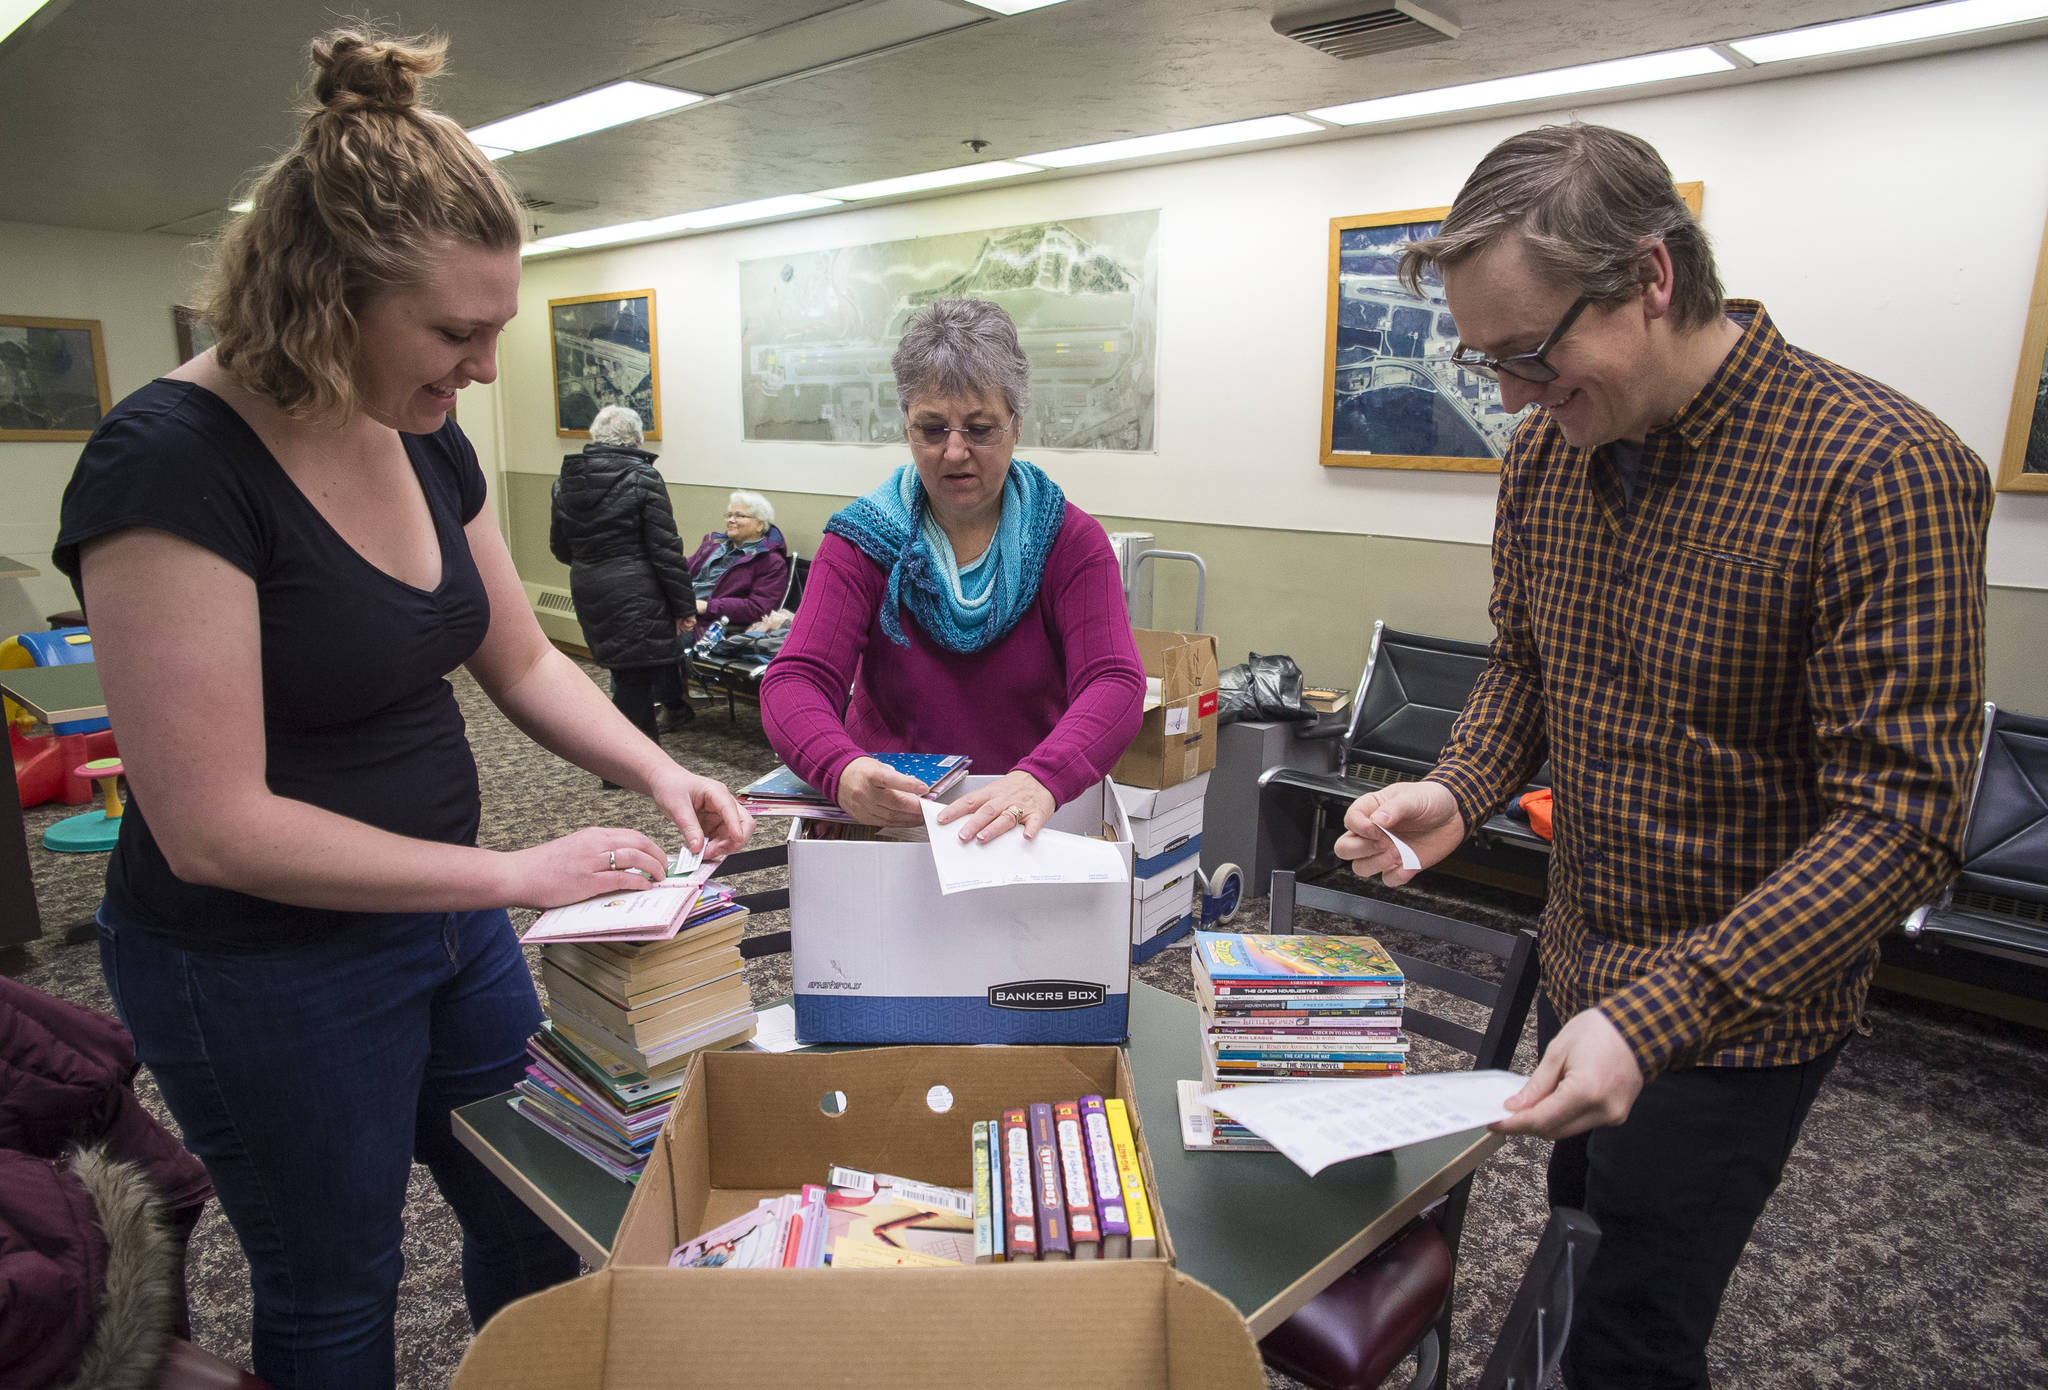 Hannah Weed, of the Association for the Education of Young Children, left, Louise Miller, of the Friends of the Juneau Public Libraries, center, and Juneau Public Librarian Jonas Lamb apply stickers to books for a new bookshelf for children at the Juneau International Airport on Wednesday, Nov. 15, 2017. A partnership between United Way, AEYC, Friends of The Juneau Public Libraries, Alaska Airlines and the Juneau Airport, the “Read on the Fly” program will offer free books to children to take as they travel to or from Juneau.